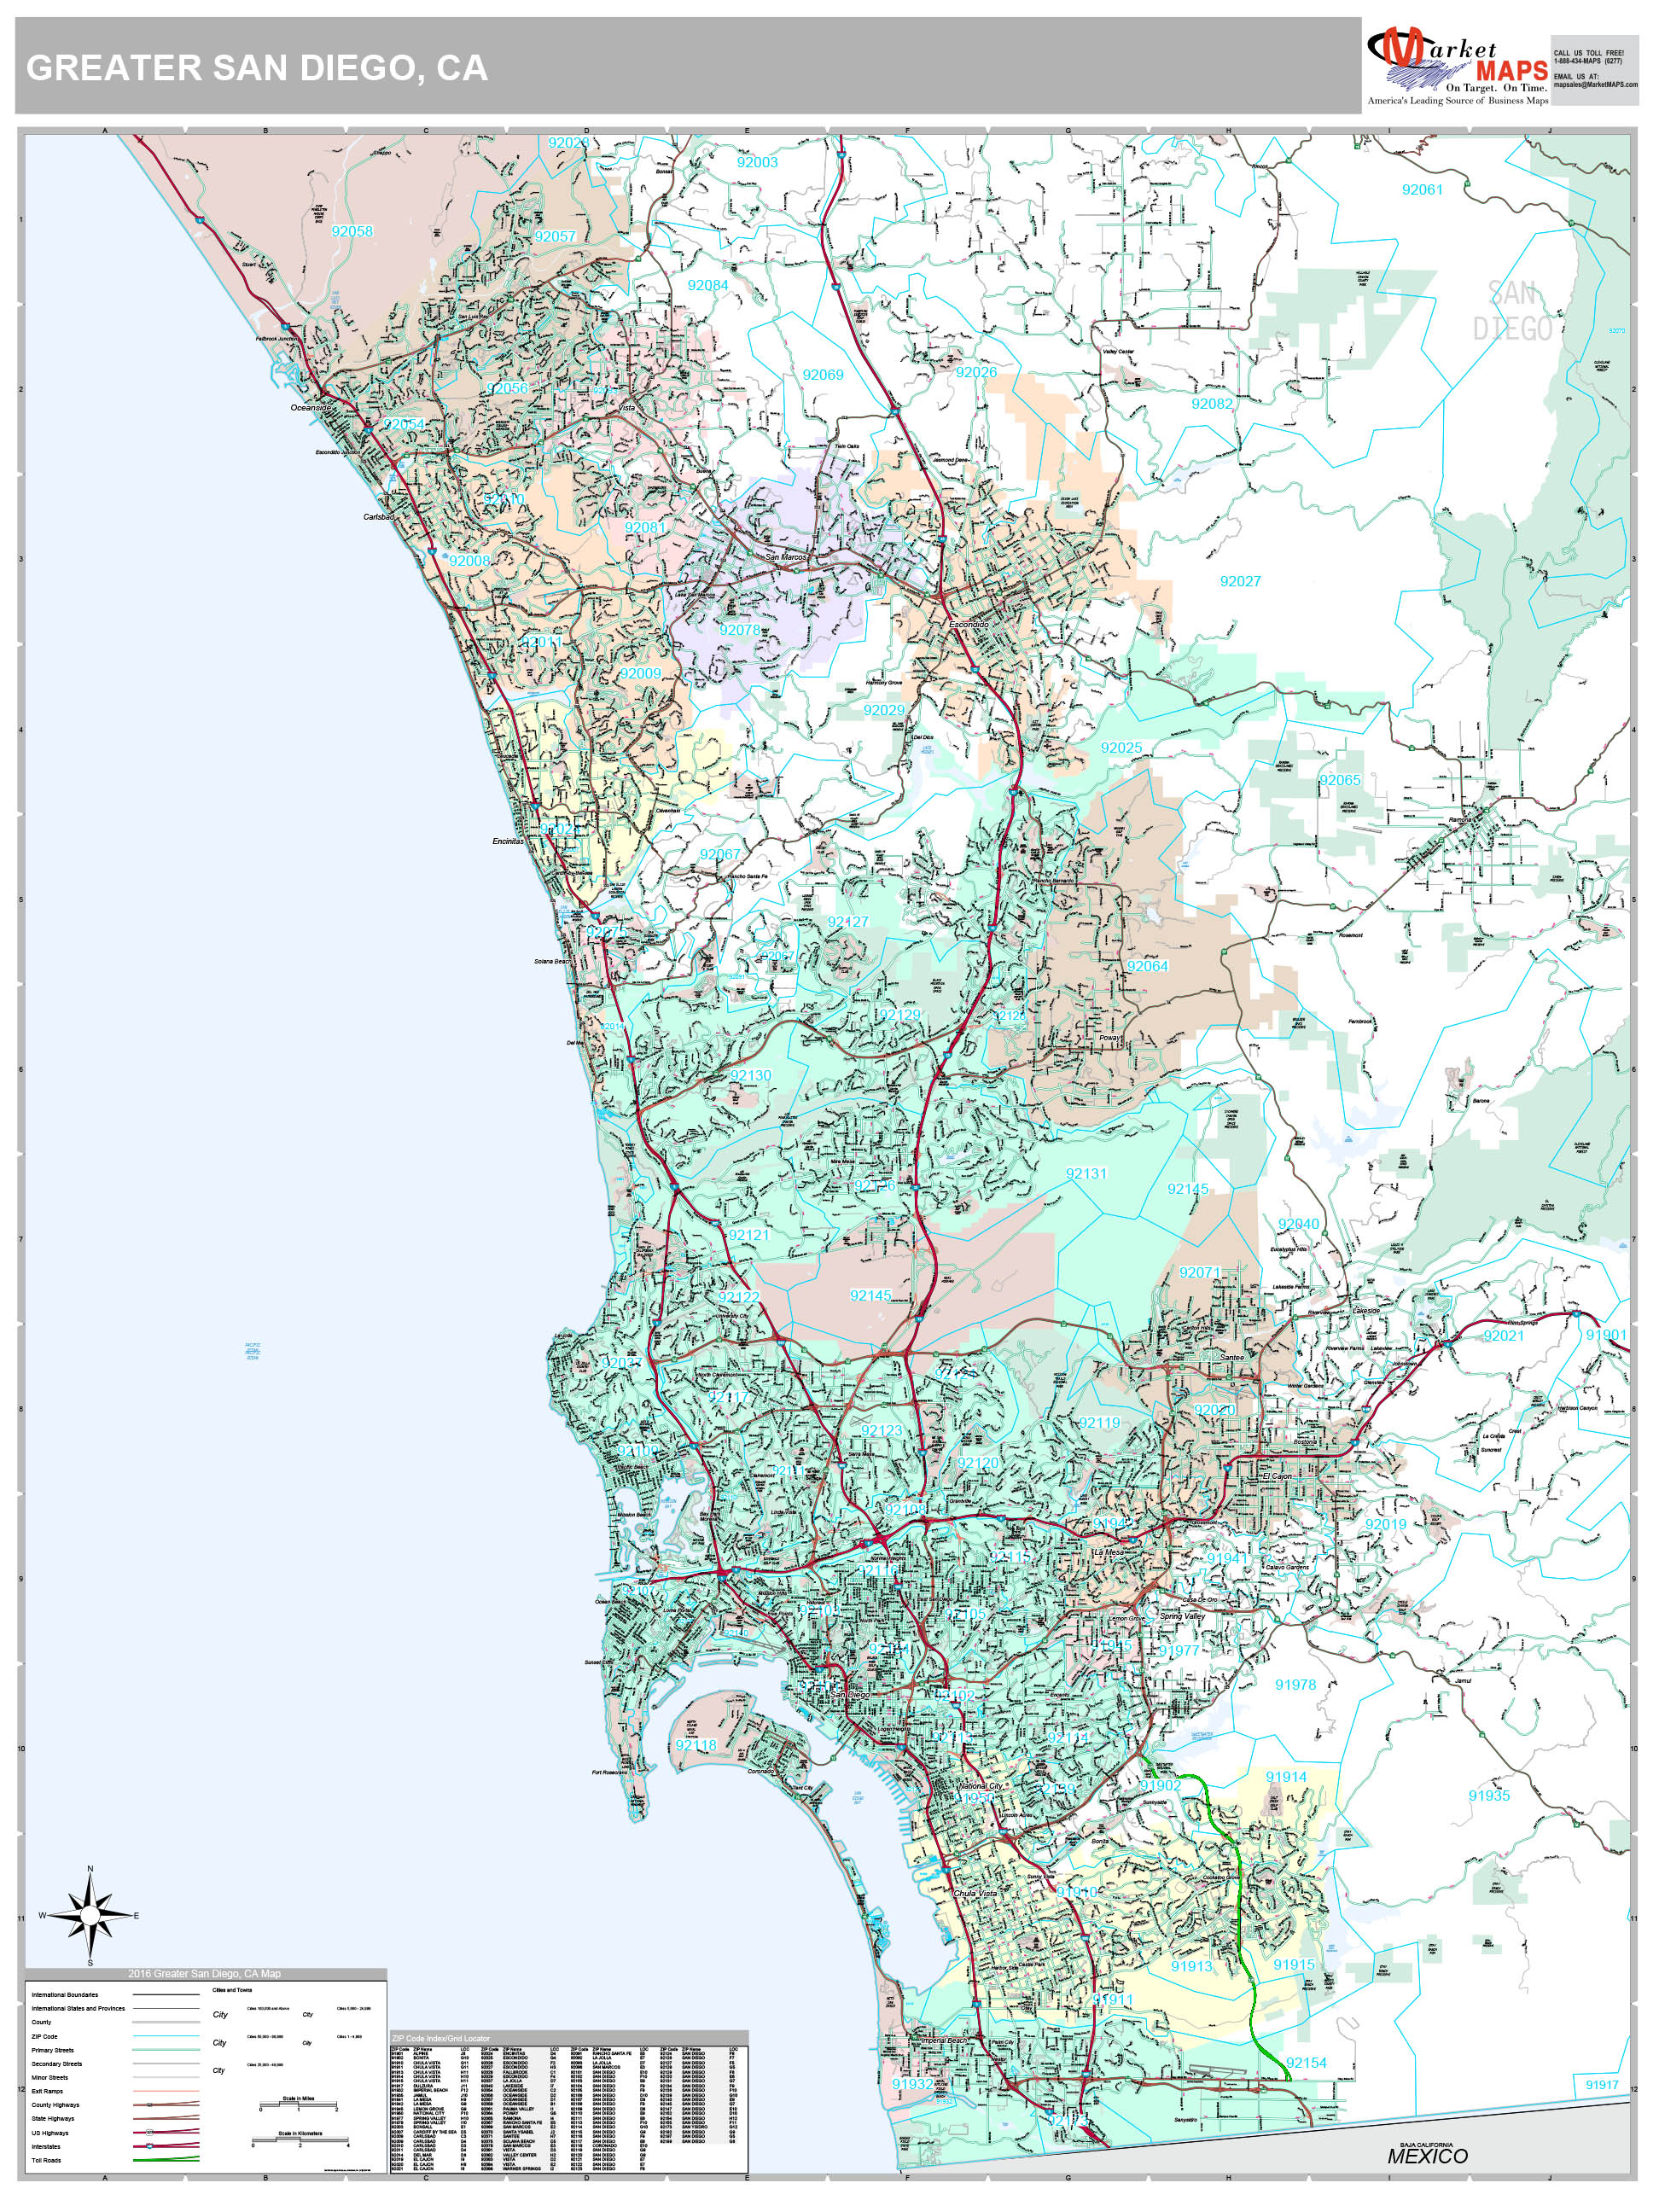 Greater San Diego Ca Metro Area Wall Map Premium Style By Marketmaps